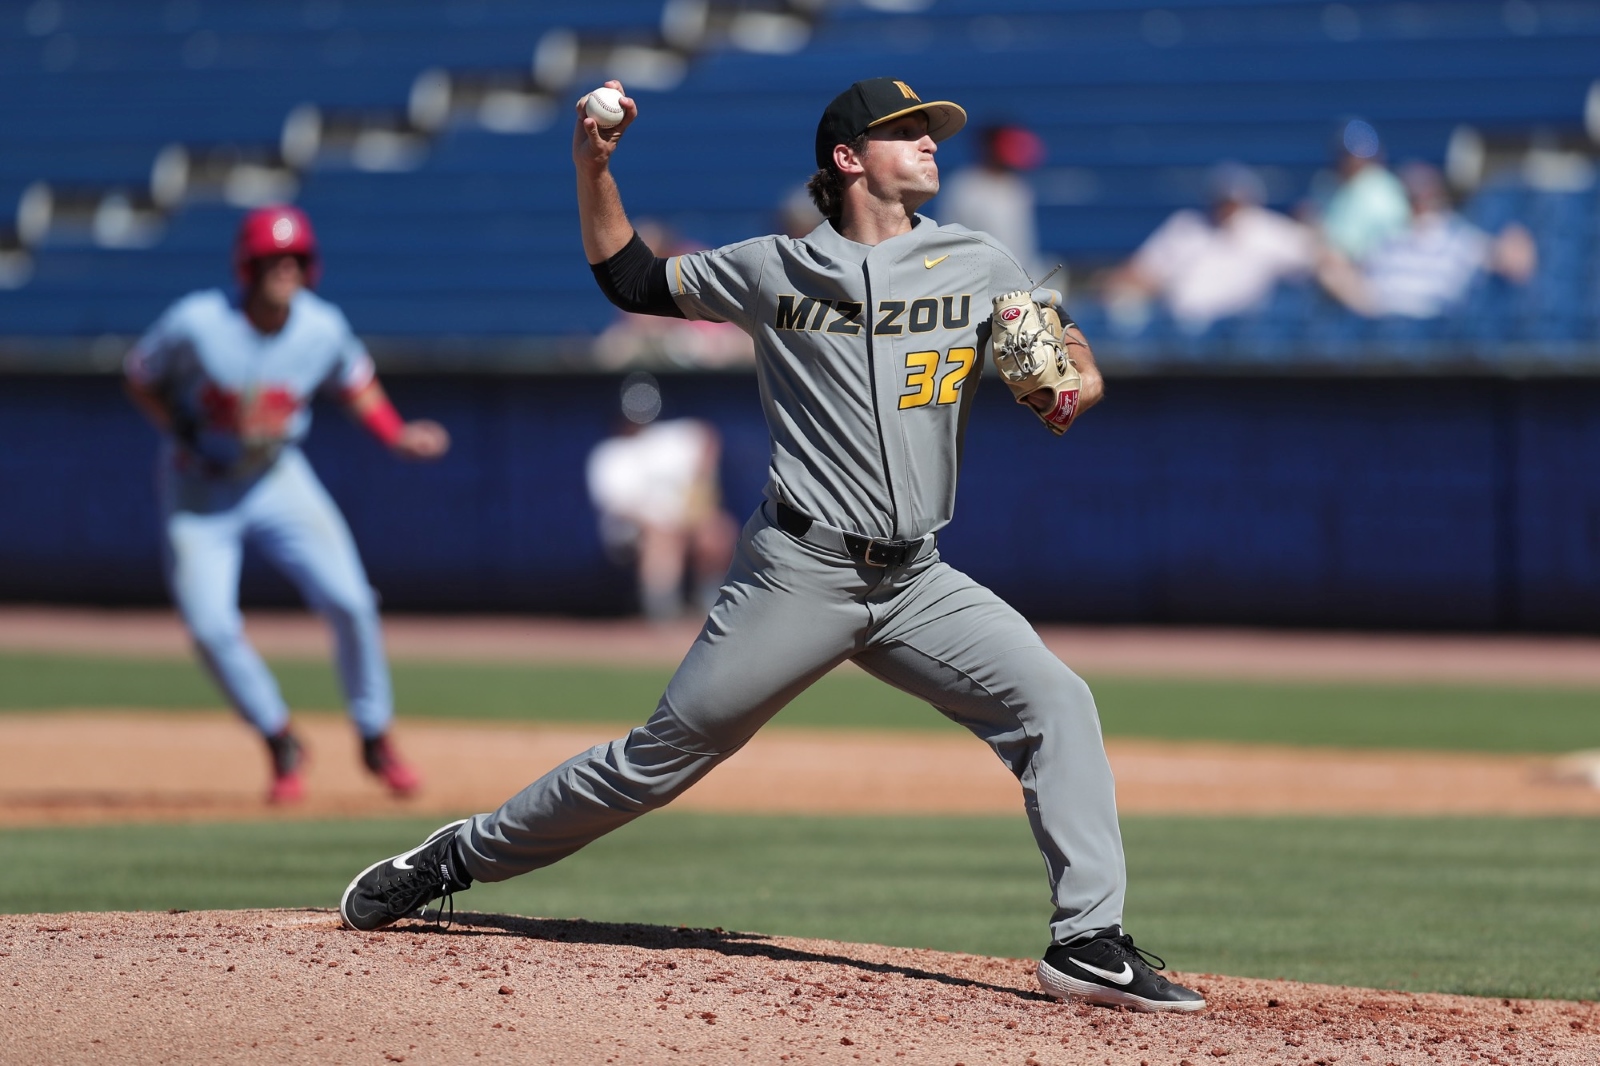 Ian Bedell, wearing a Mizzou Tigers uniform, pitches the baseball during a game.